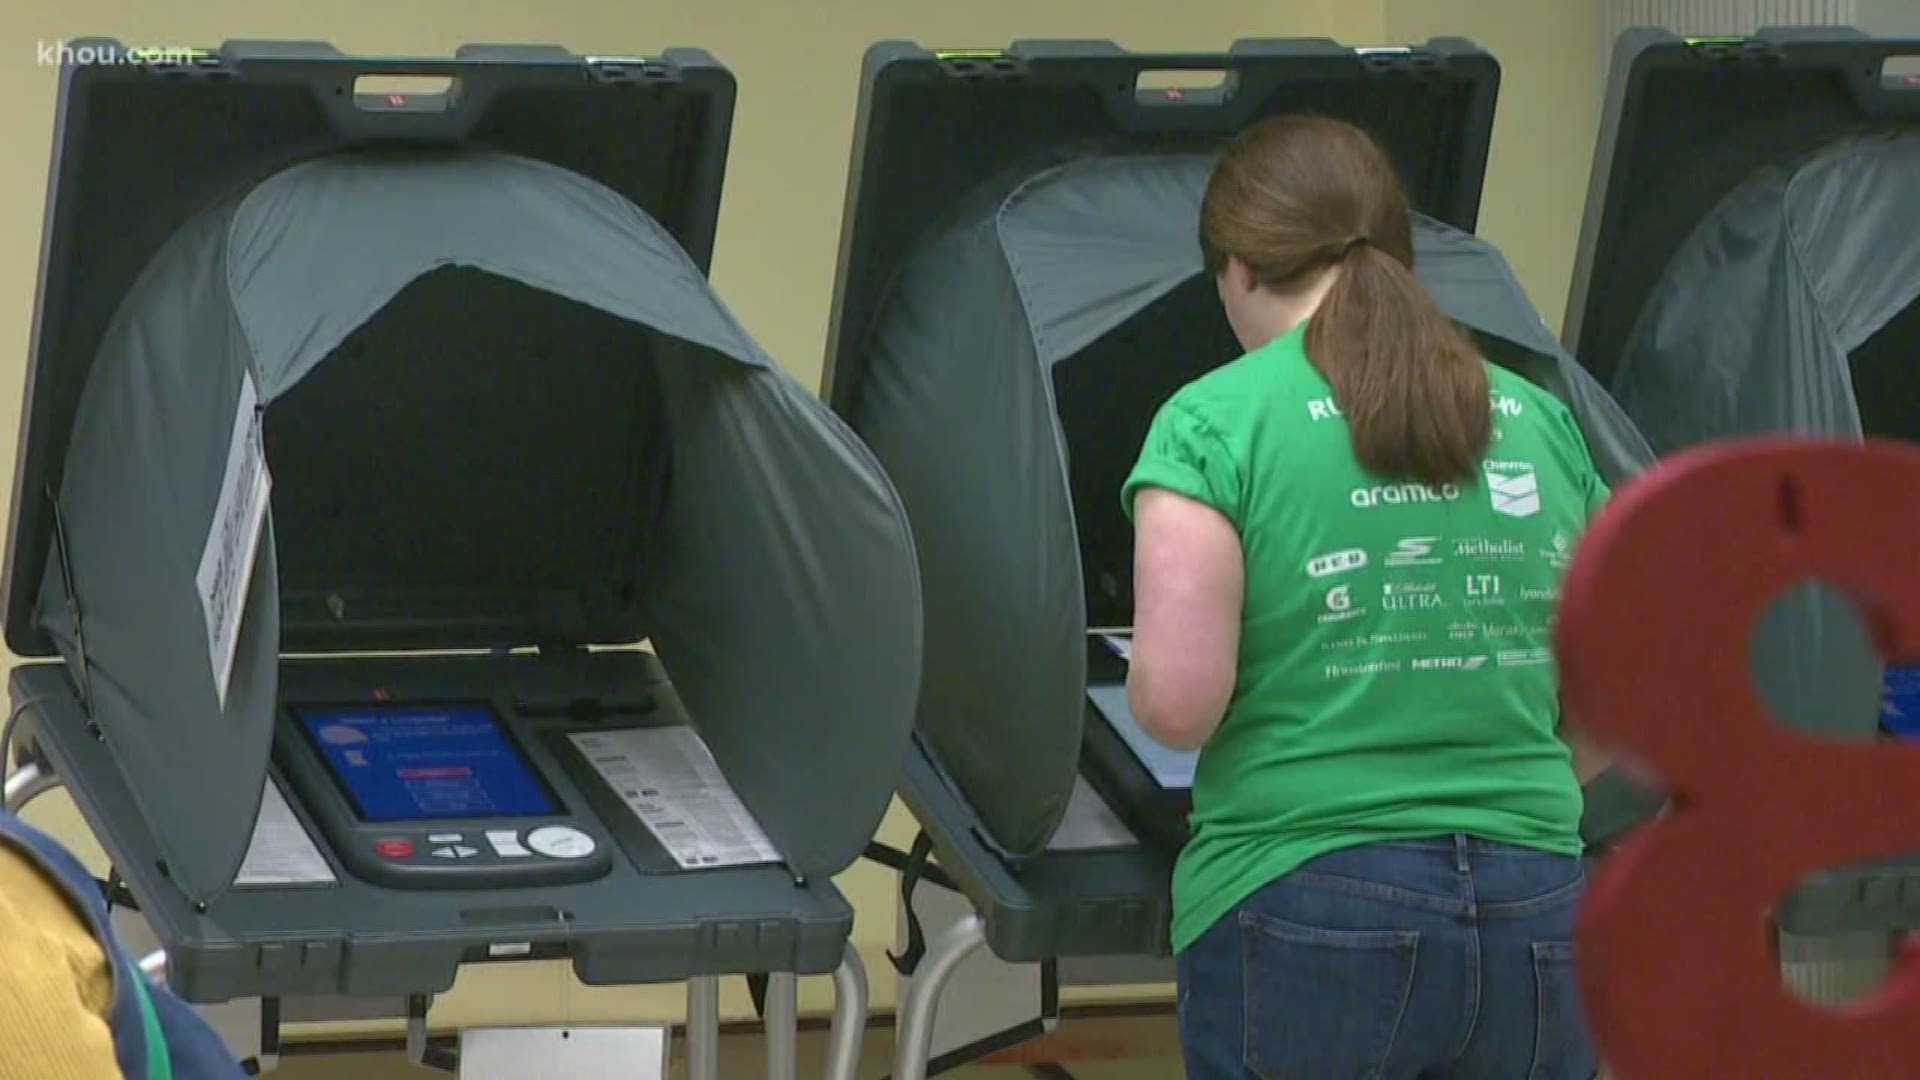 Election officials are confident the adjusted system will be faster than the one used in November 2019, when it took nearly 12 hours to get results.